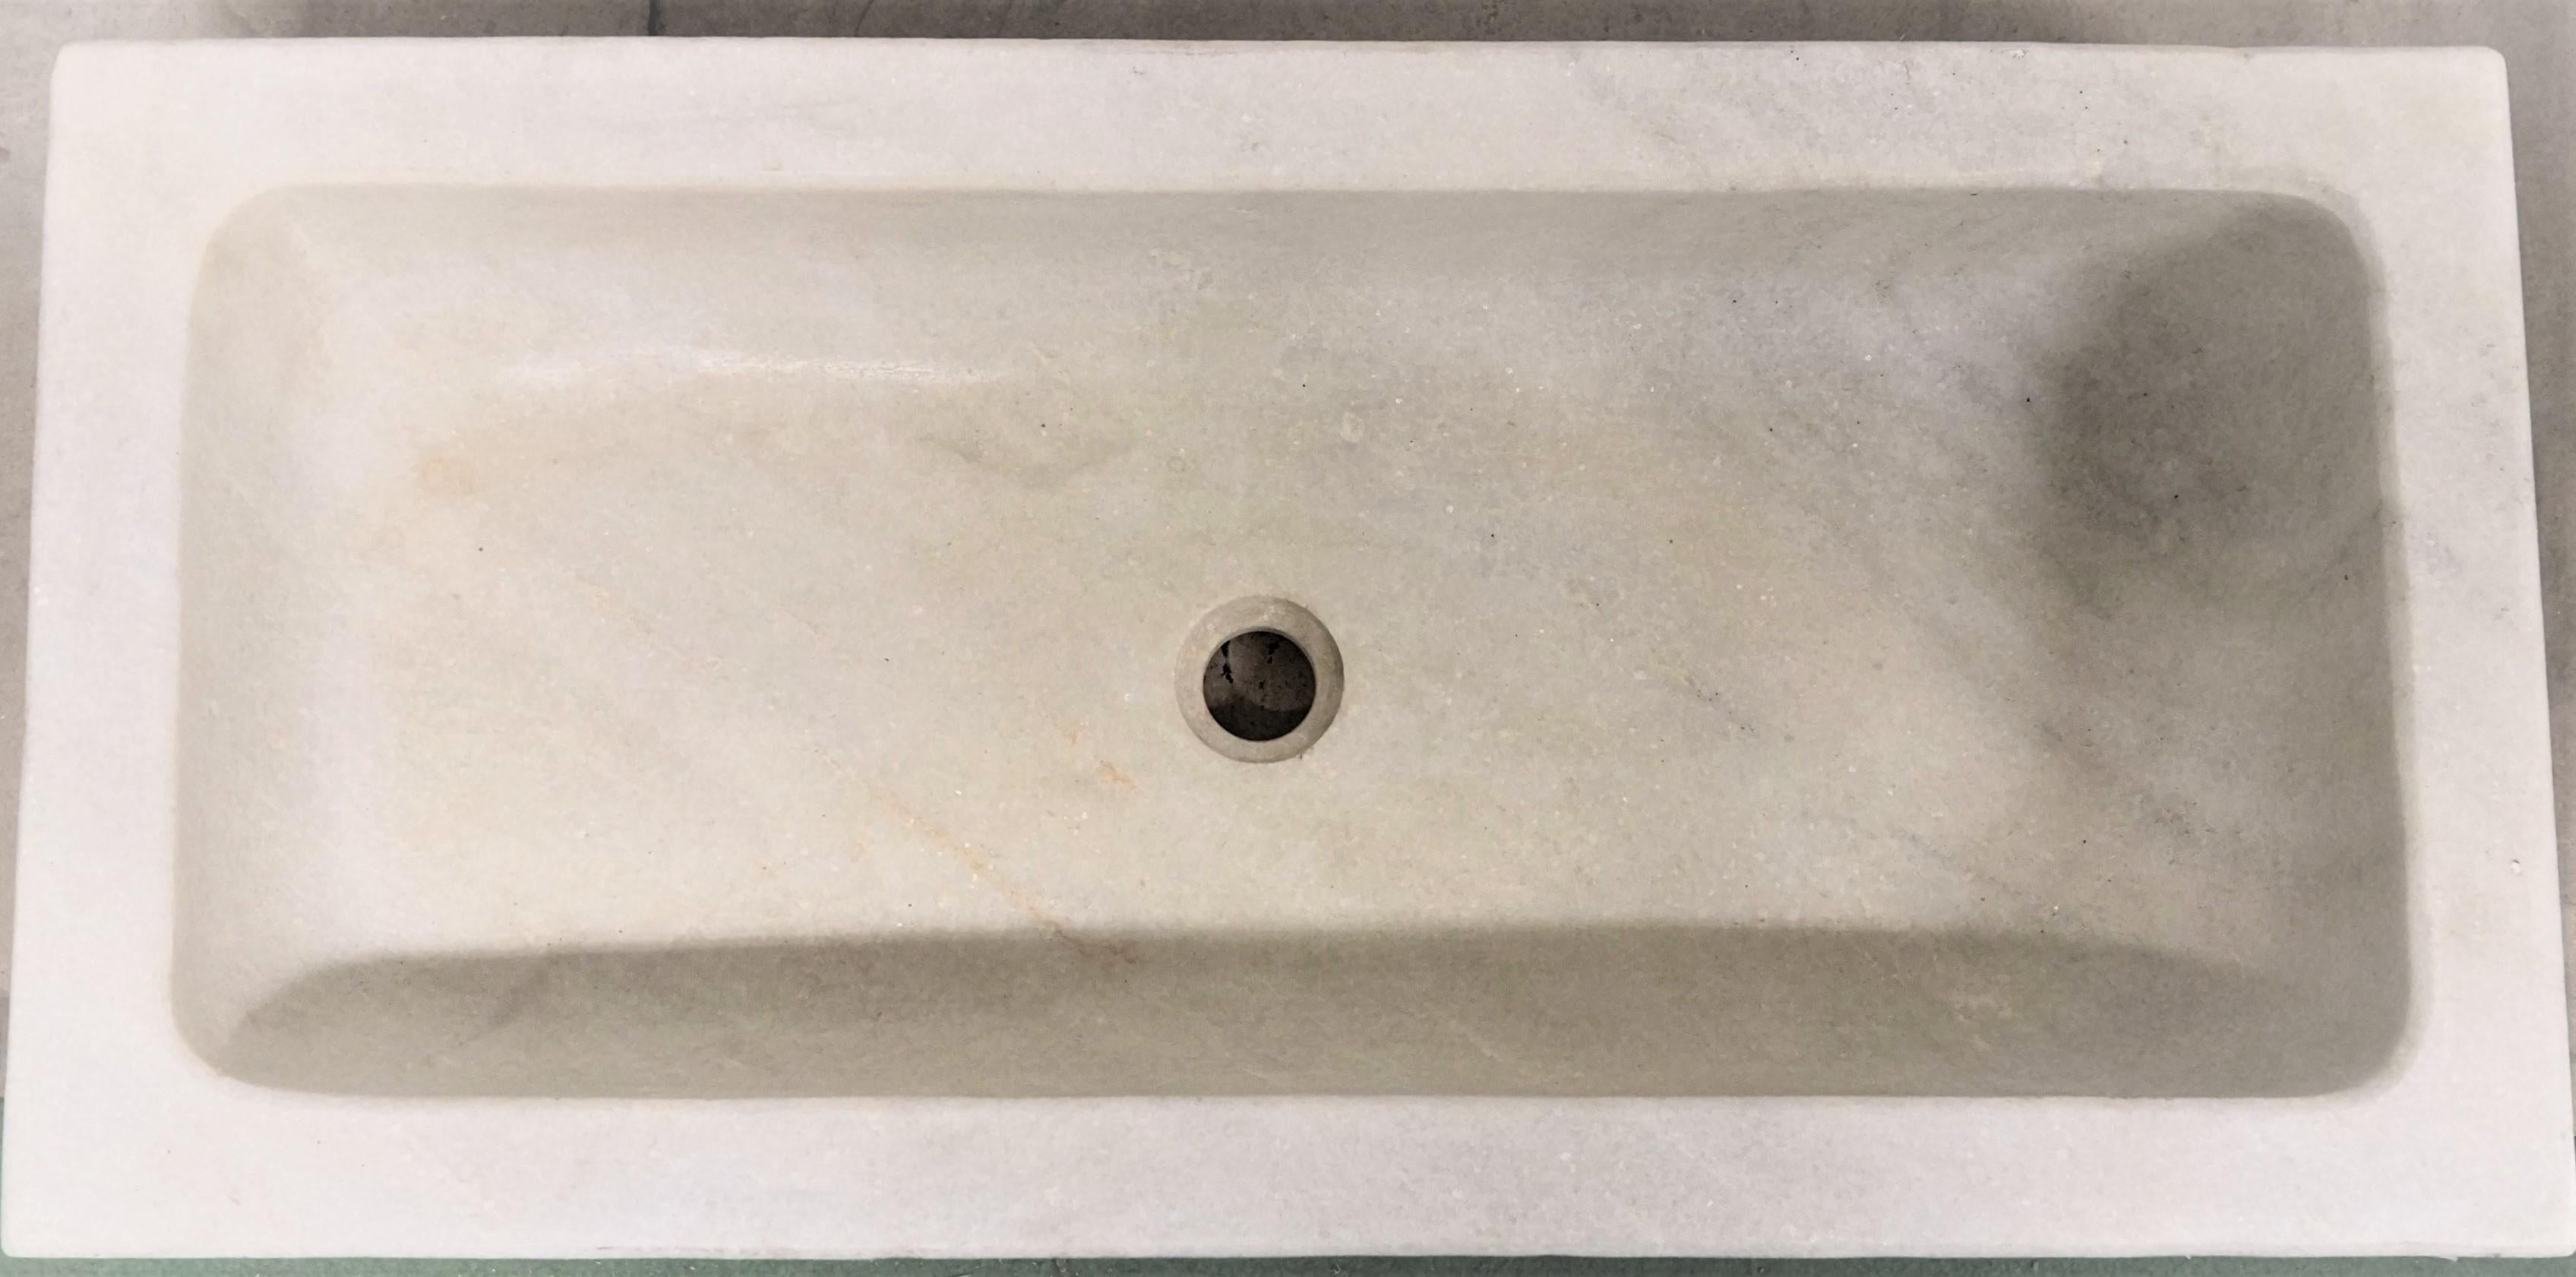 A simple natural design ideal for a kitchen or bathroom for old and new buildings,
superb warm veined character stone cut from one piece of Carrara marble.
Sink manufactured in Carrara marble, custom sizing available.
 